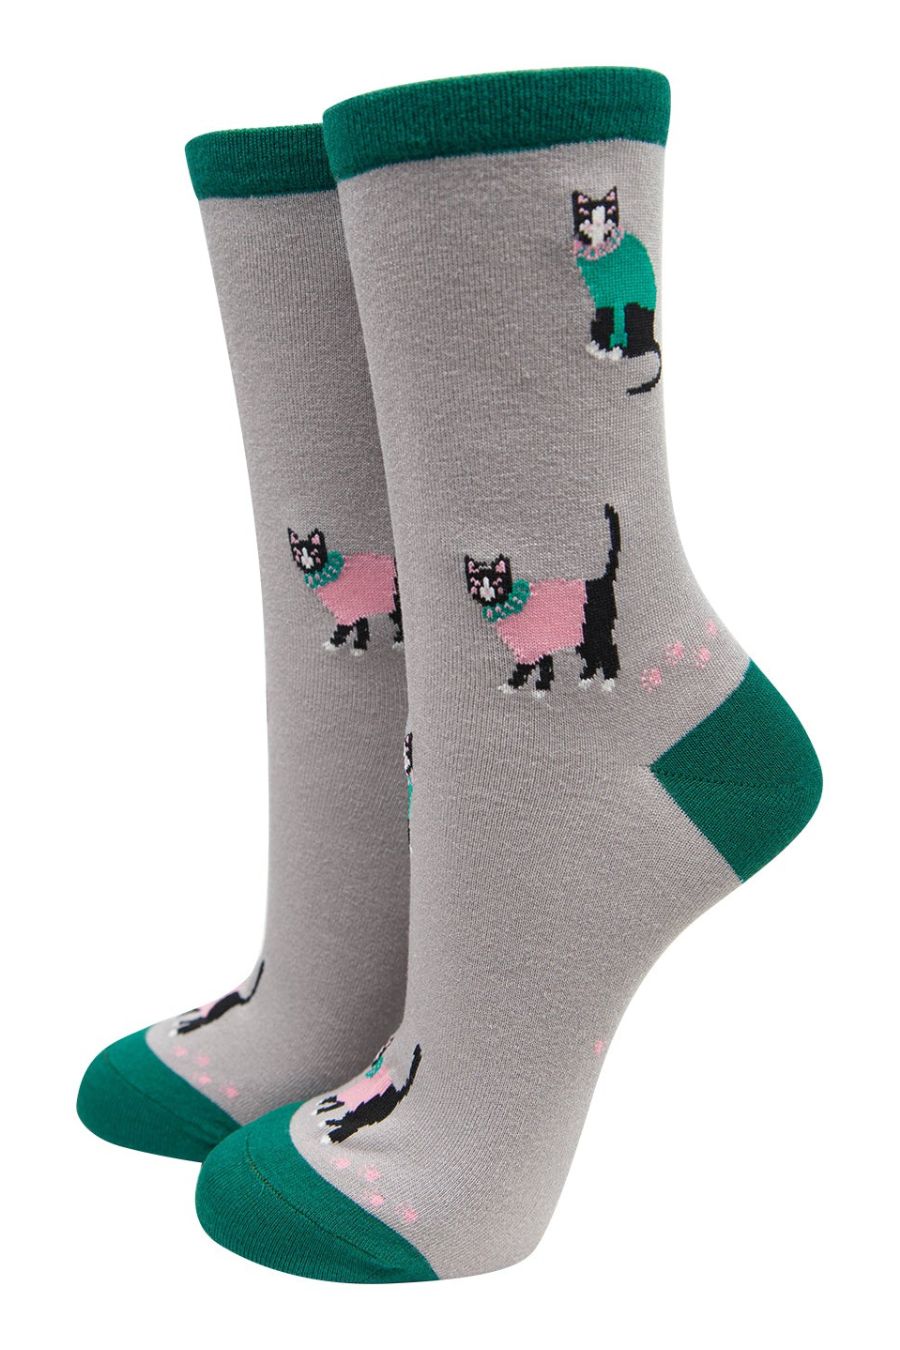 grey bamboo ankle socks featuting black cats wearing knitted sweaters